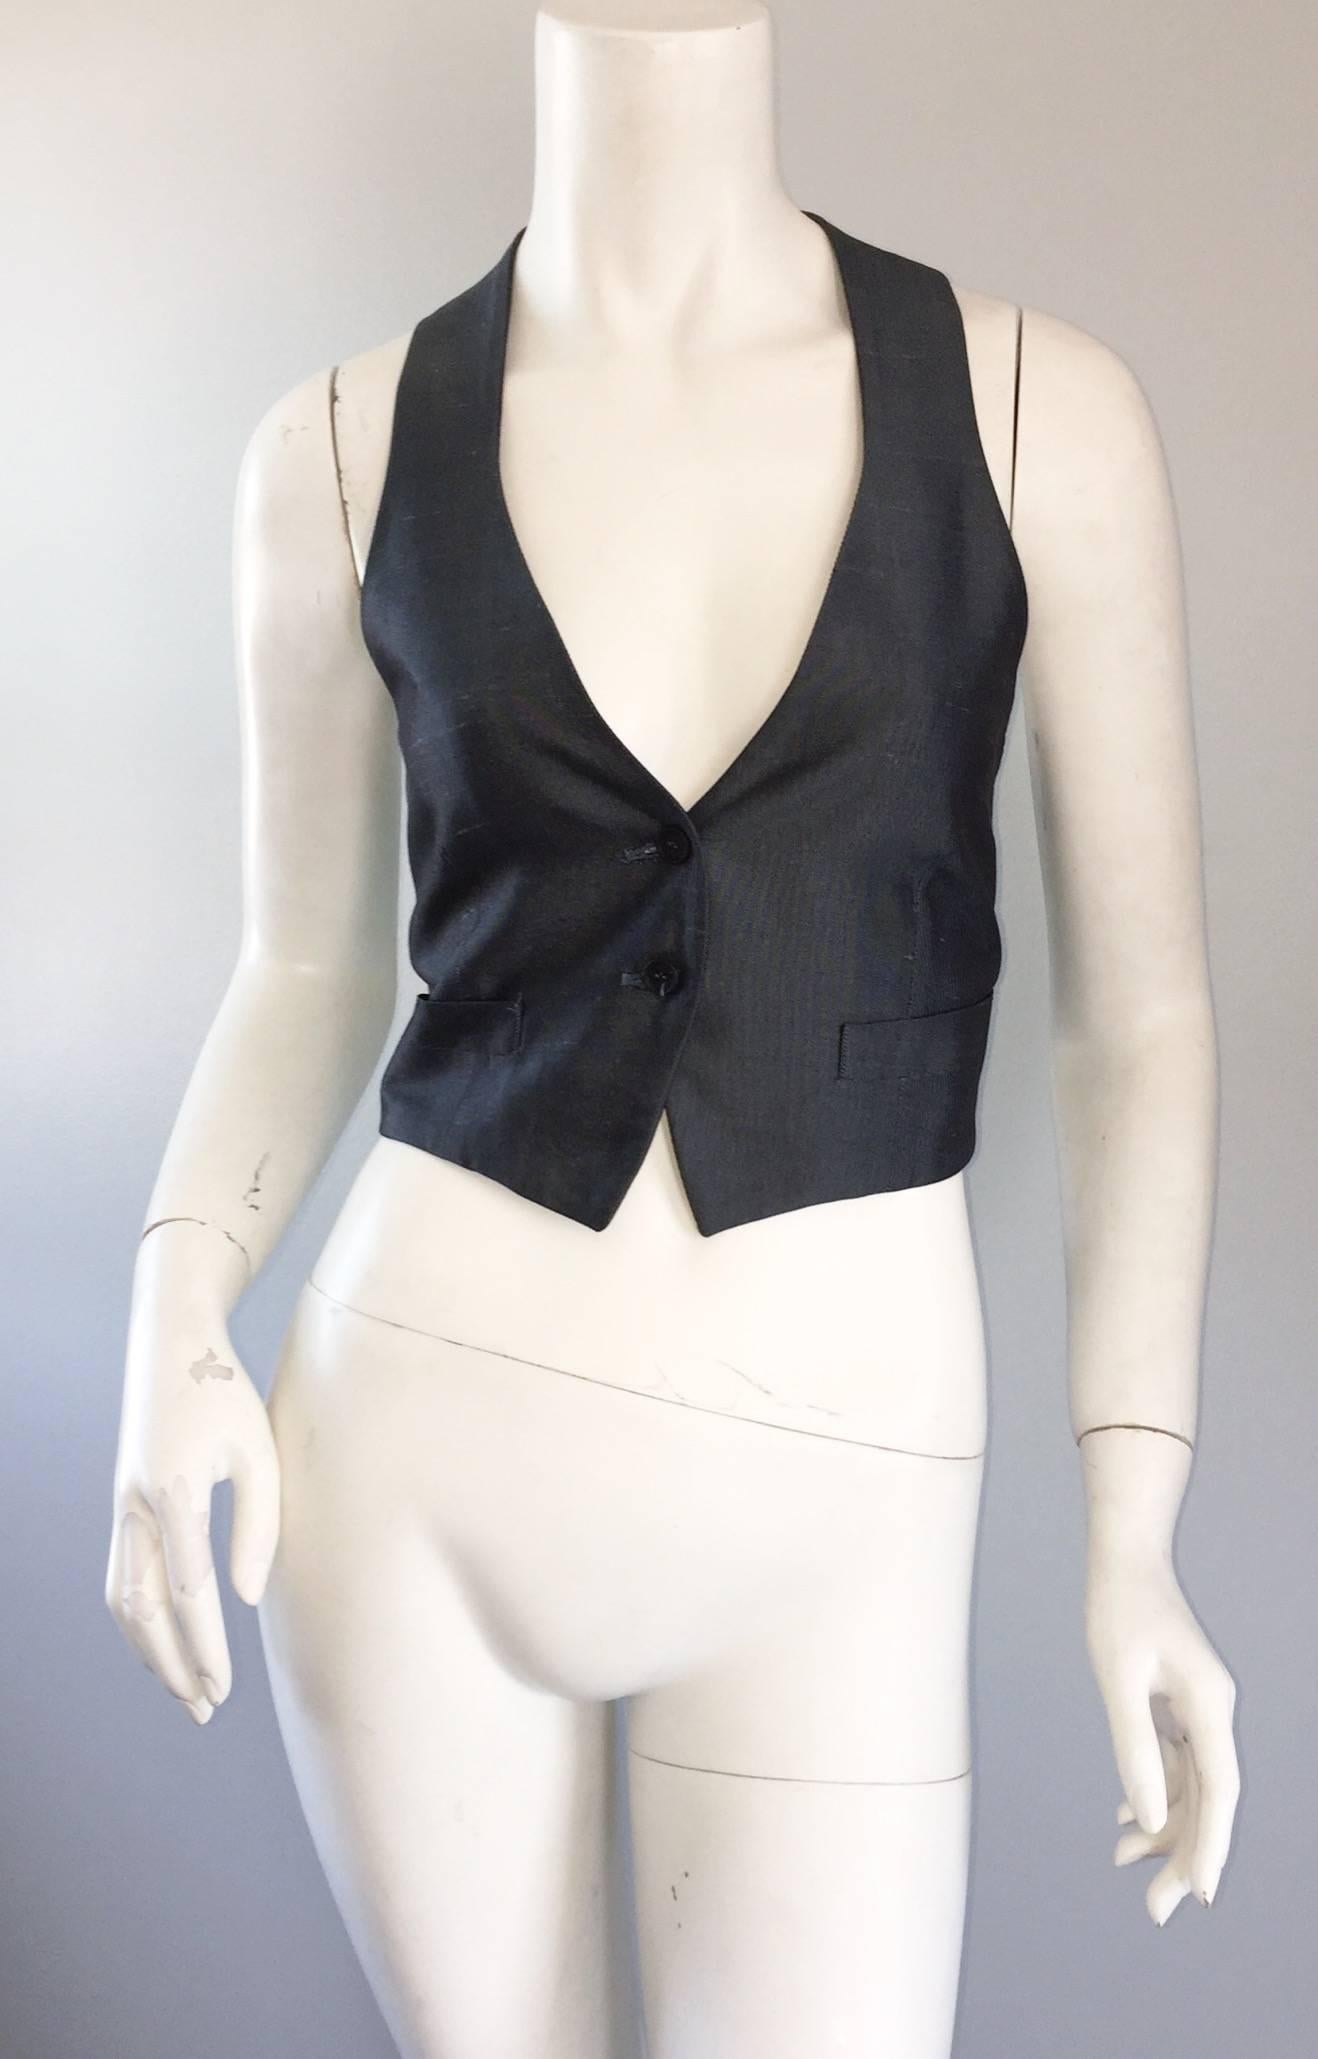 Chic 1990s ROMEO GIGLI blue / gray cropped waistcoat vest! Features two buttons up the bodice, one pocket at each side of the waist, and an adjustable strap on the back waist to tighten the shape. Wonderful contrasting silk green back. Perfect with